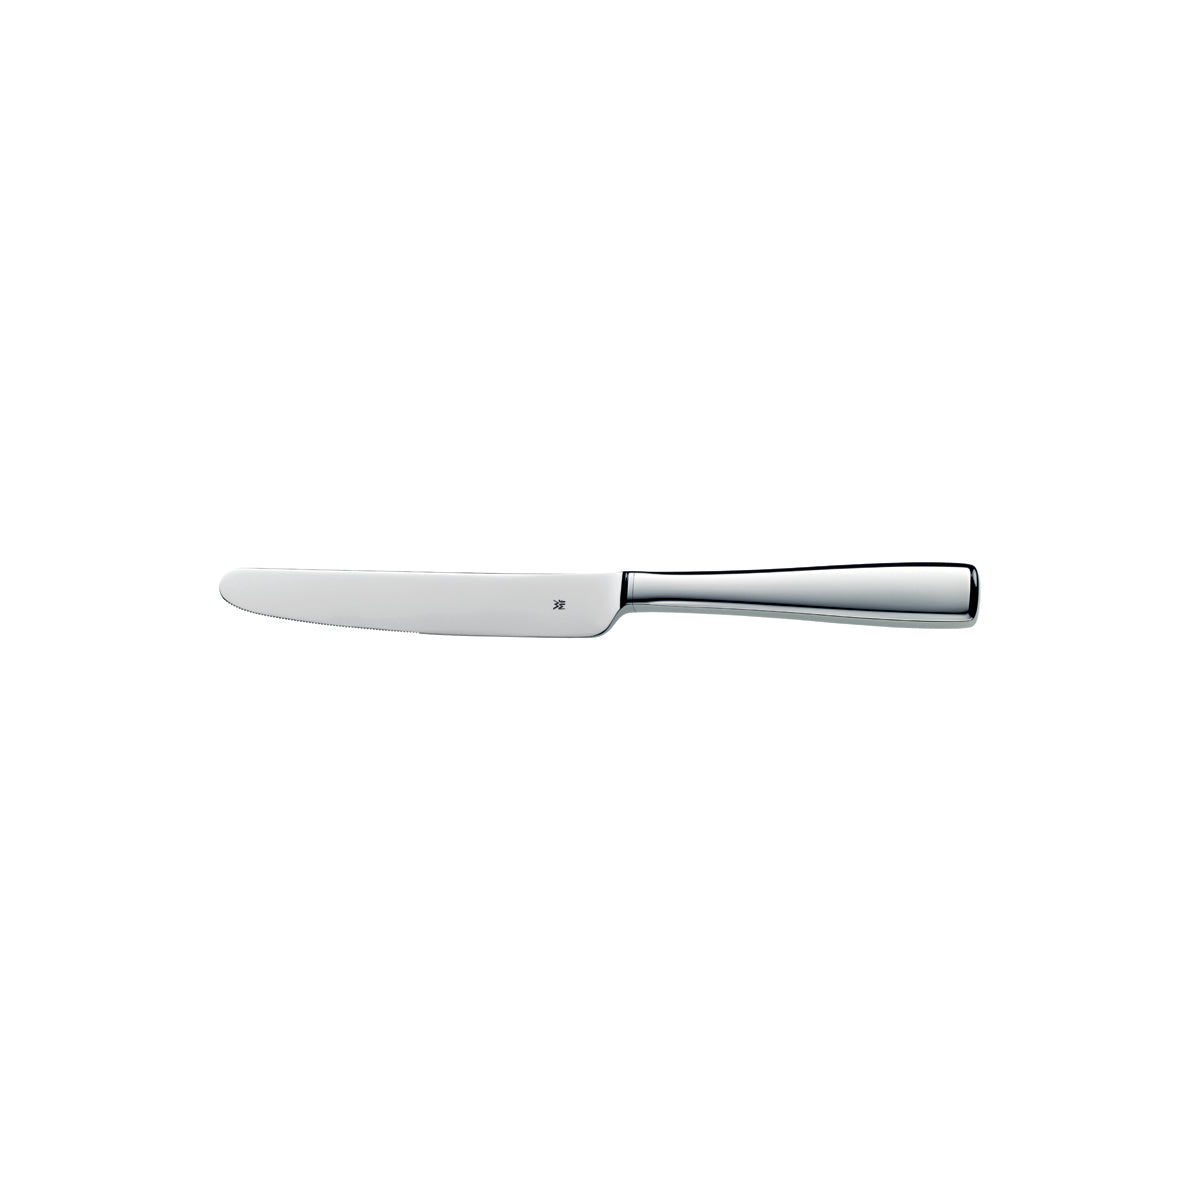 12.7903.6049 WMF Solid Table Knife Stainless Steel Tomkin Australia Hospitality Supplies